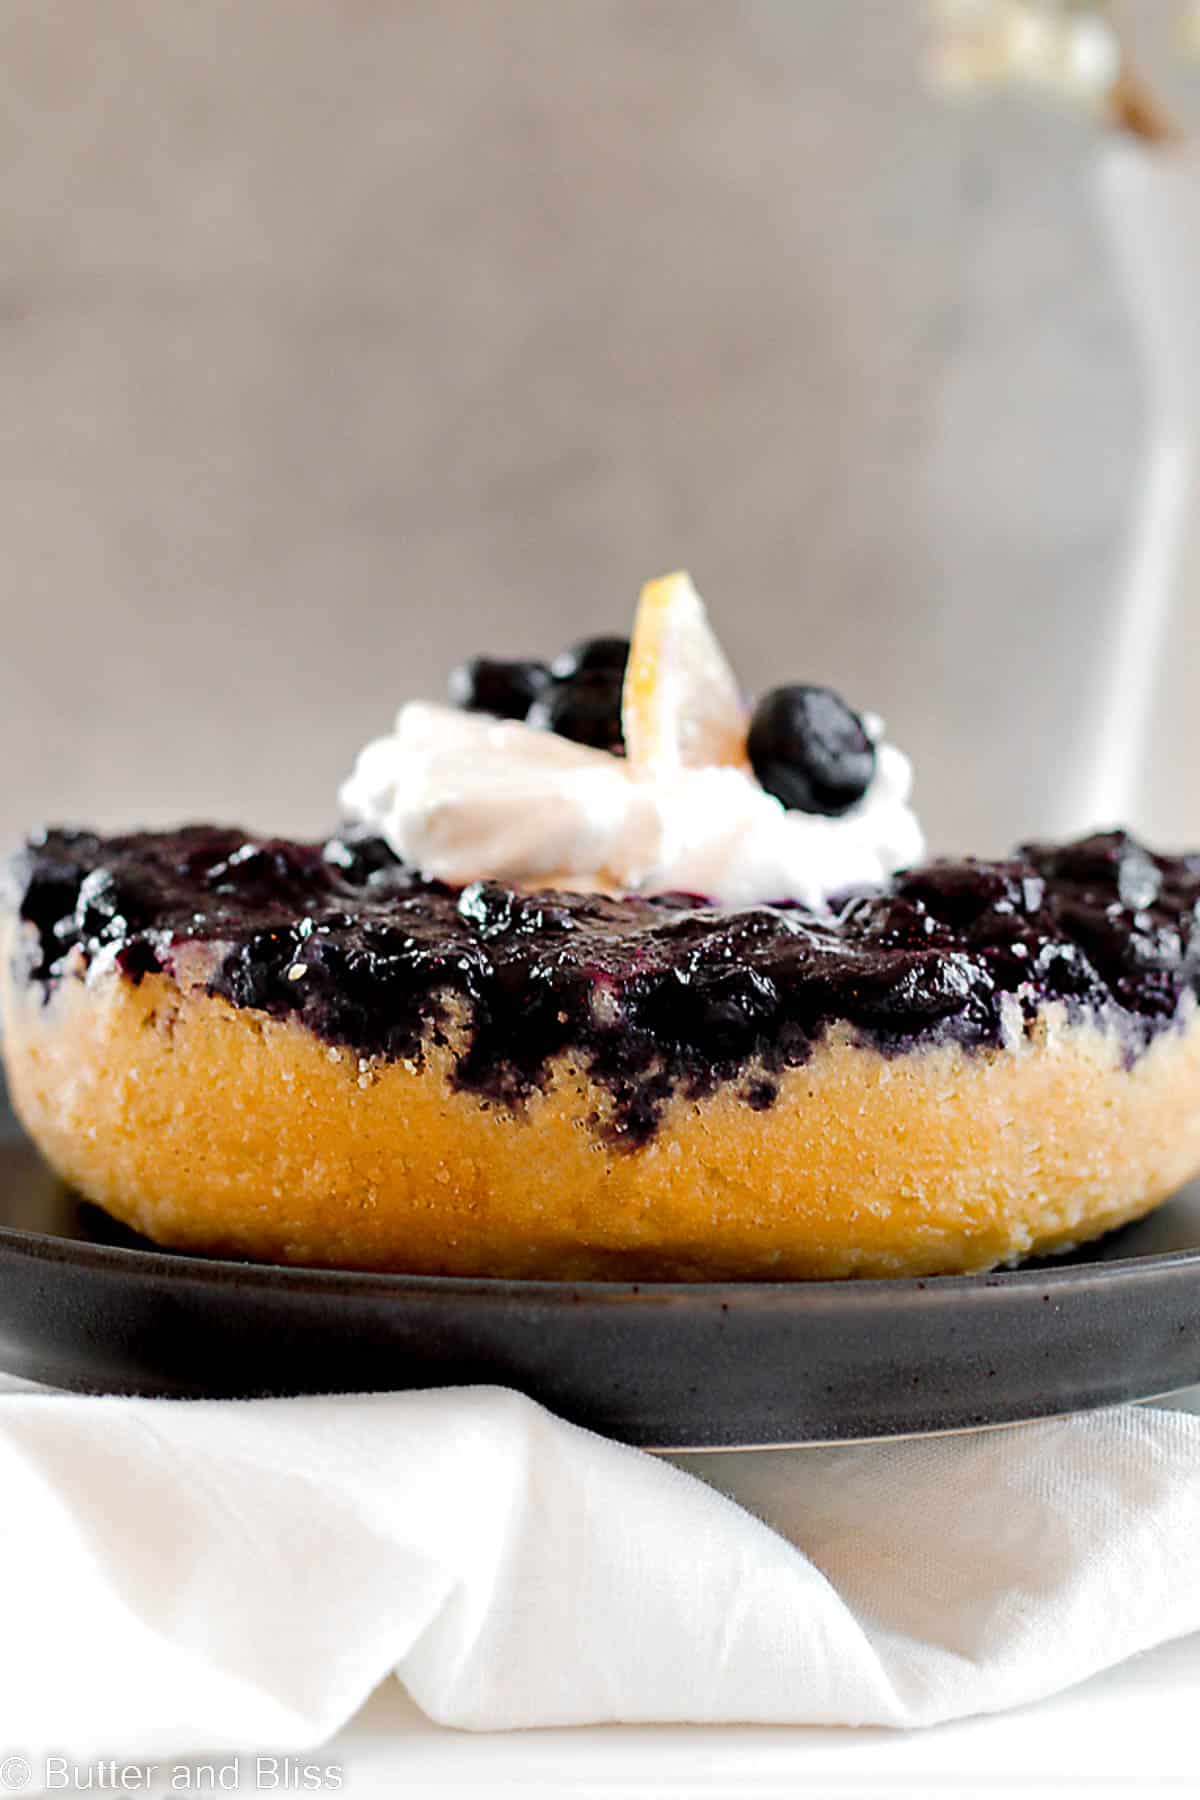 Vibrant blueberry upside down cake on a dark plate.